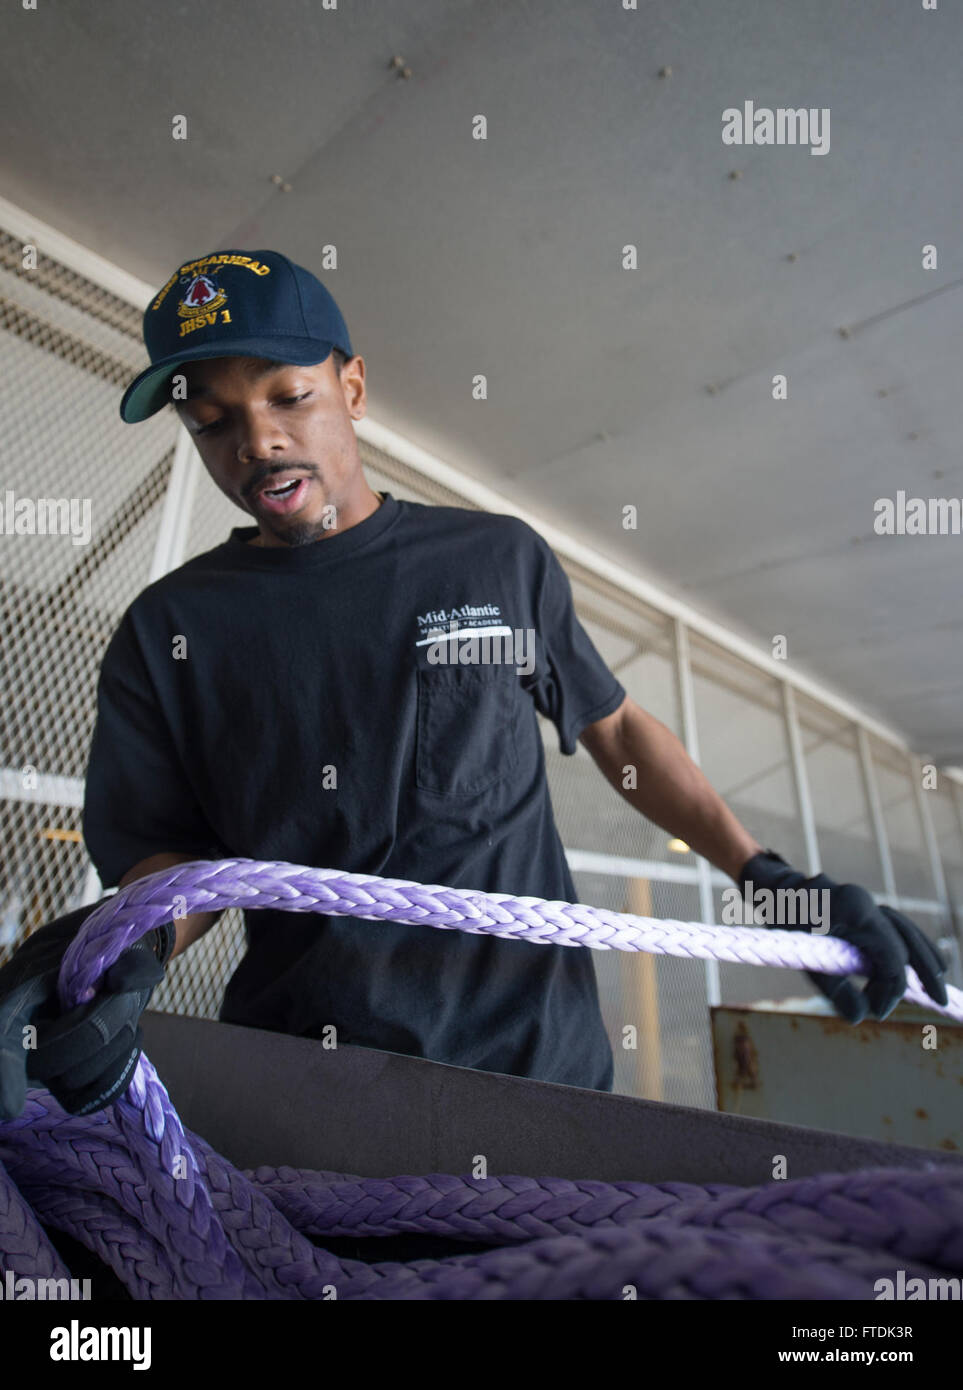 160104-N-WV703-096 ATLANTIC OCEAN (Jan. 4, 2016) David Leader, a civil service mariner, stows new mooring line aboard USNS Spearhead (T-EPF 1) Jan. 4, 2015. The Military Sealift Command expeditionary fast transport vessel USNS Spearhead (T-EPF 1) is on a scheduled deployment to the U.S. 6th Fleet area of operations to support the international collaborative capacity-building program Africa Partnership Station. (U.S. Navy photo by Mass Communication Specialist 3rd Class Amy M. Ressler/Released) Stock Photo